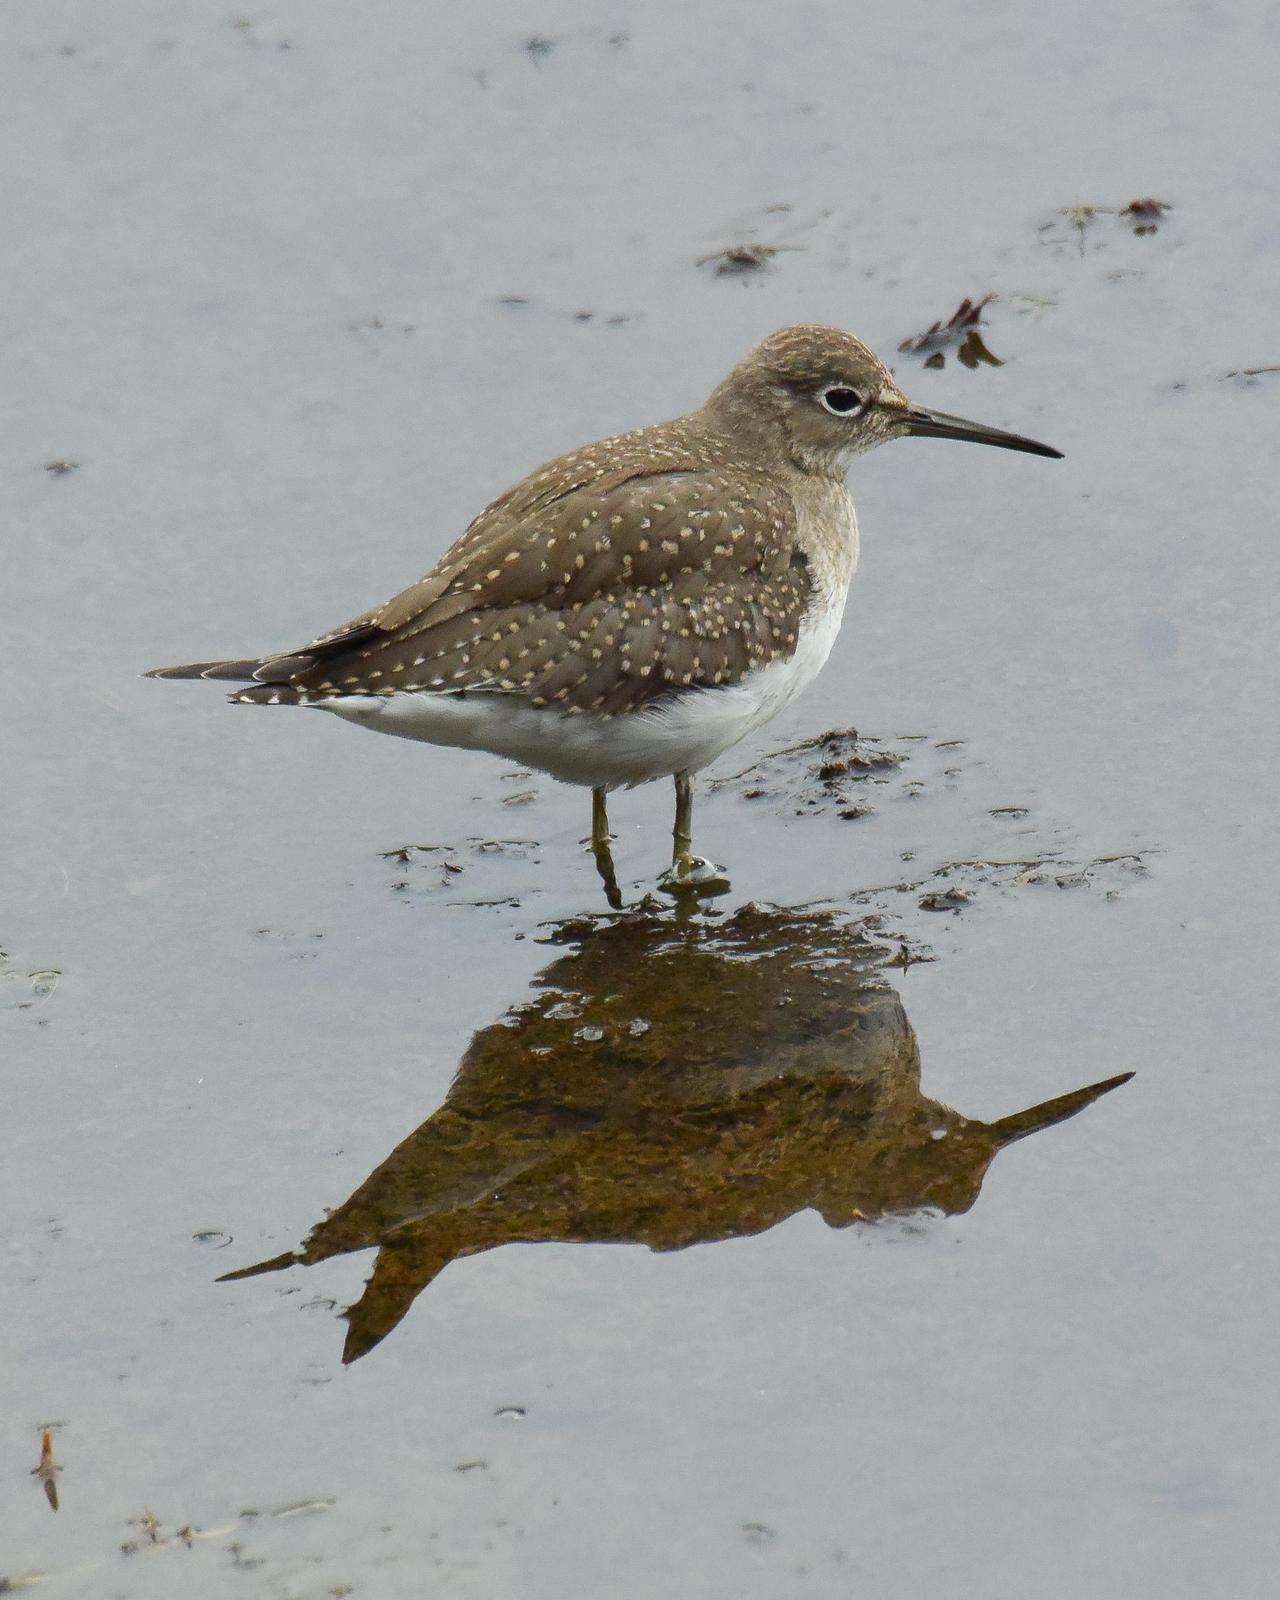 Solitary Sandpiper Photo by Emily Percival